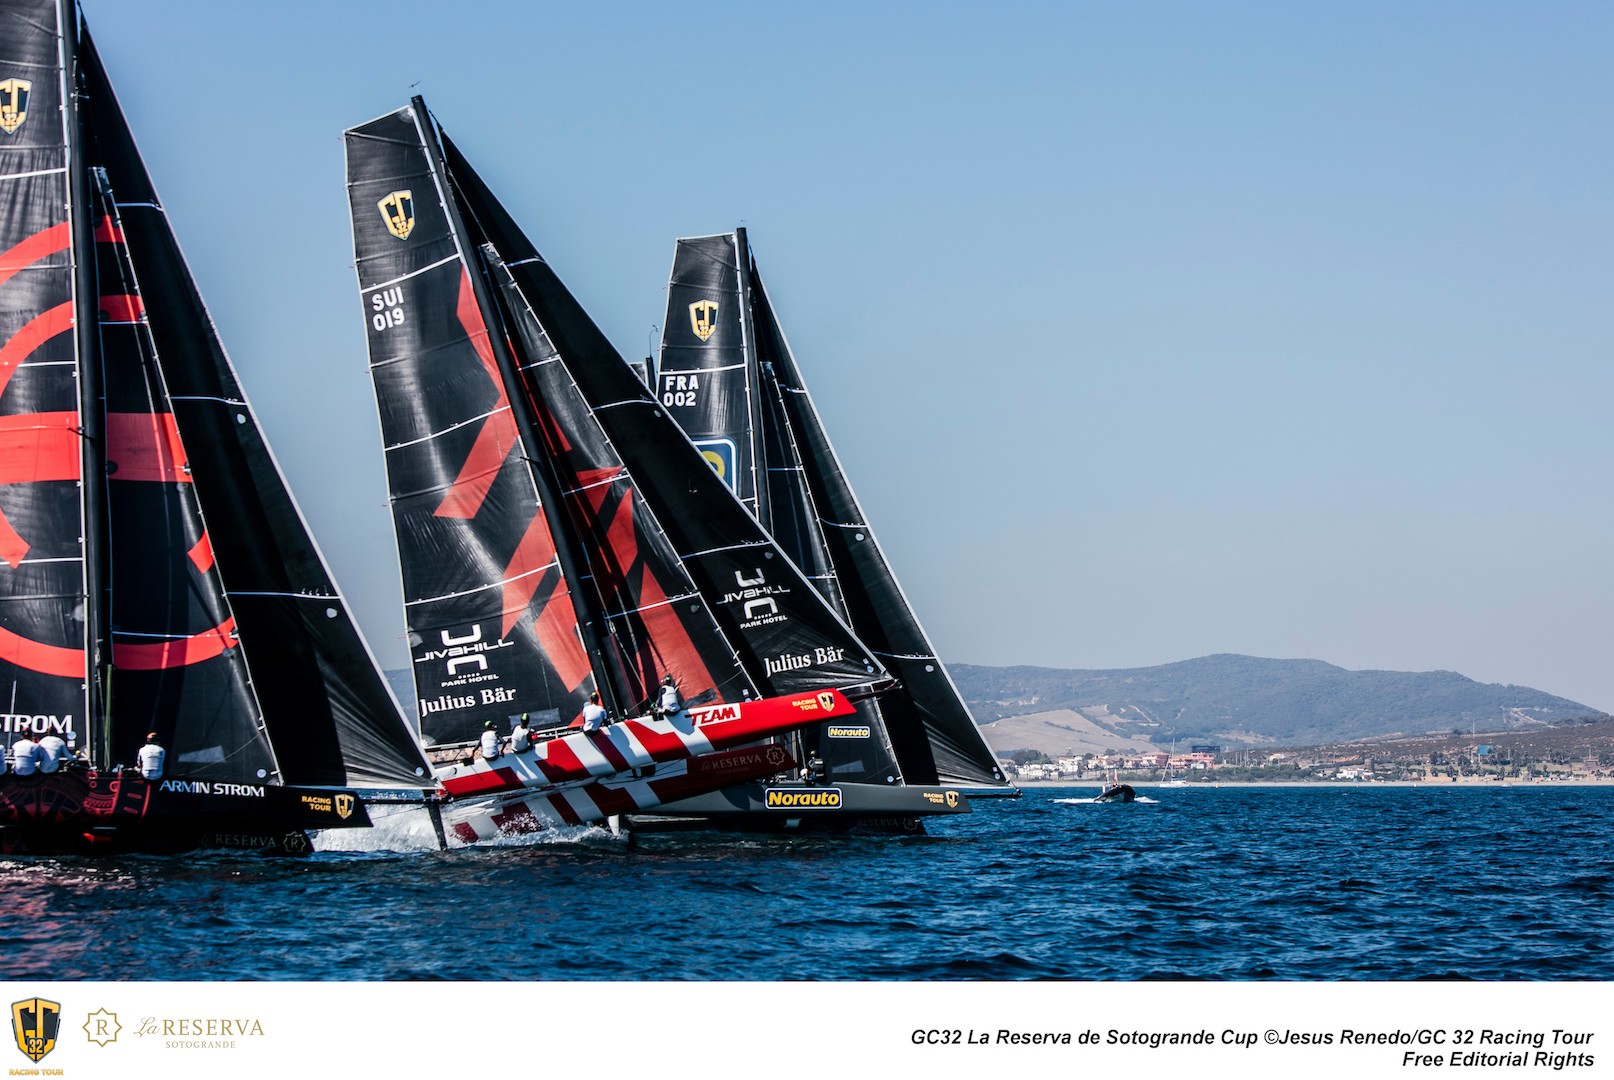 Team Tilt on the edge of control in the GC32